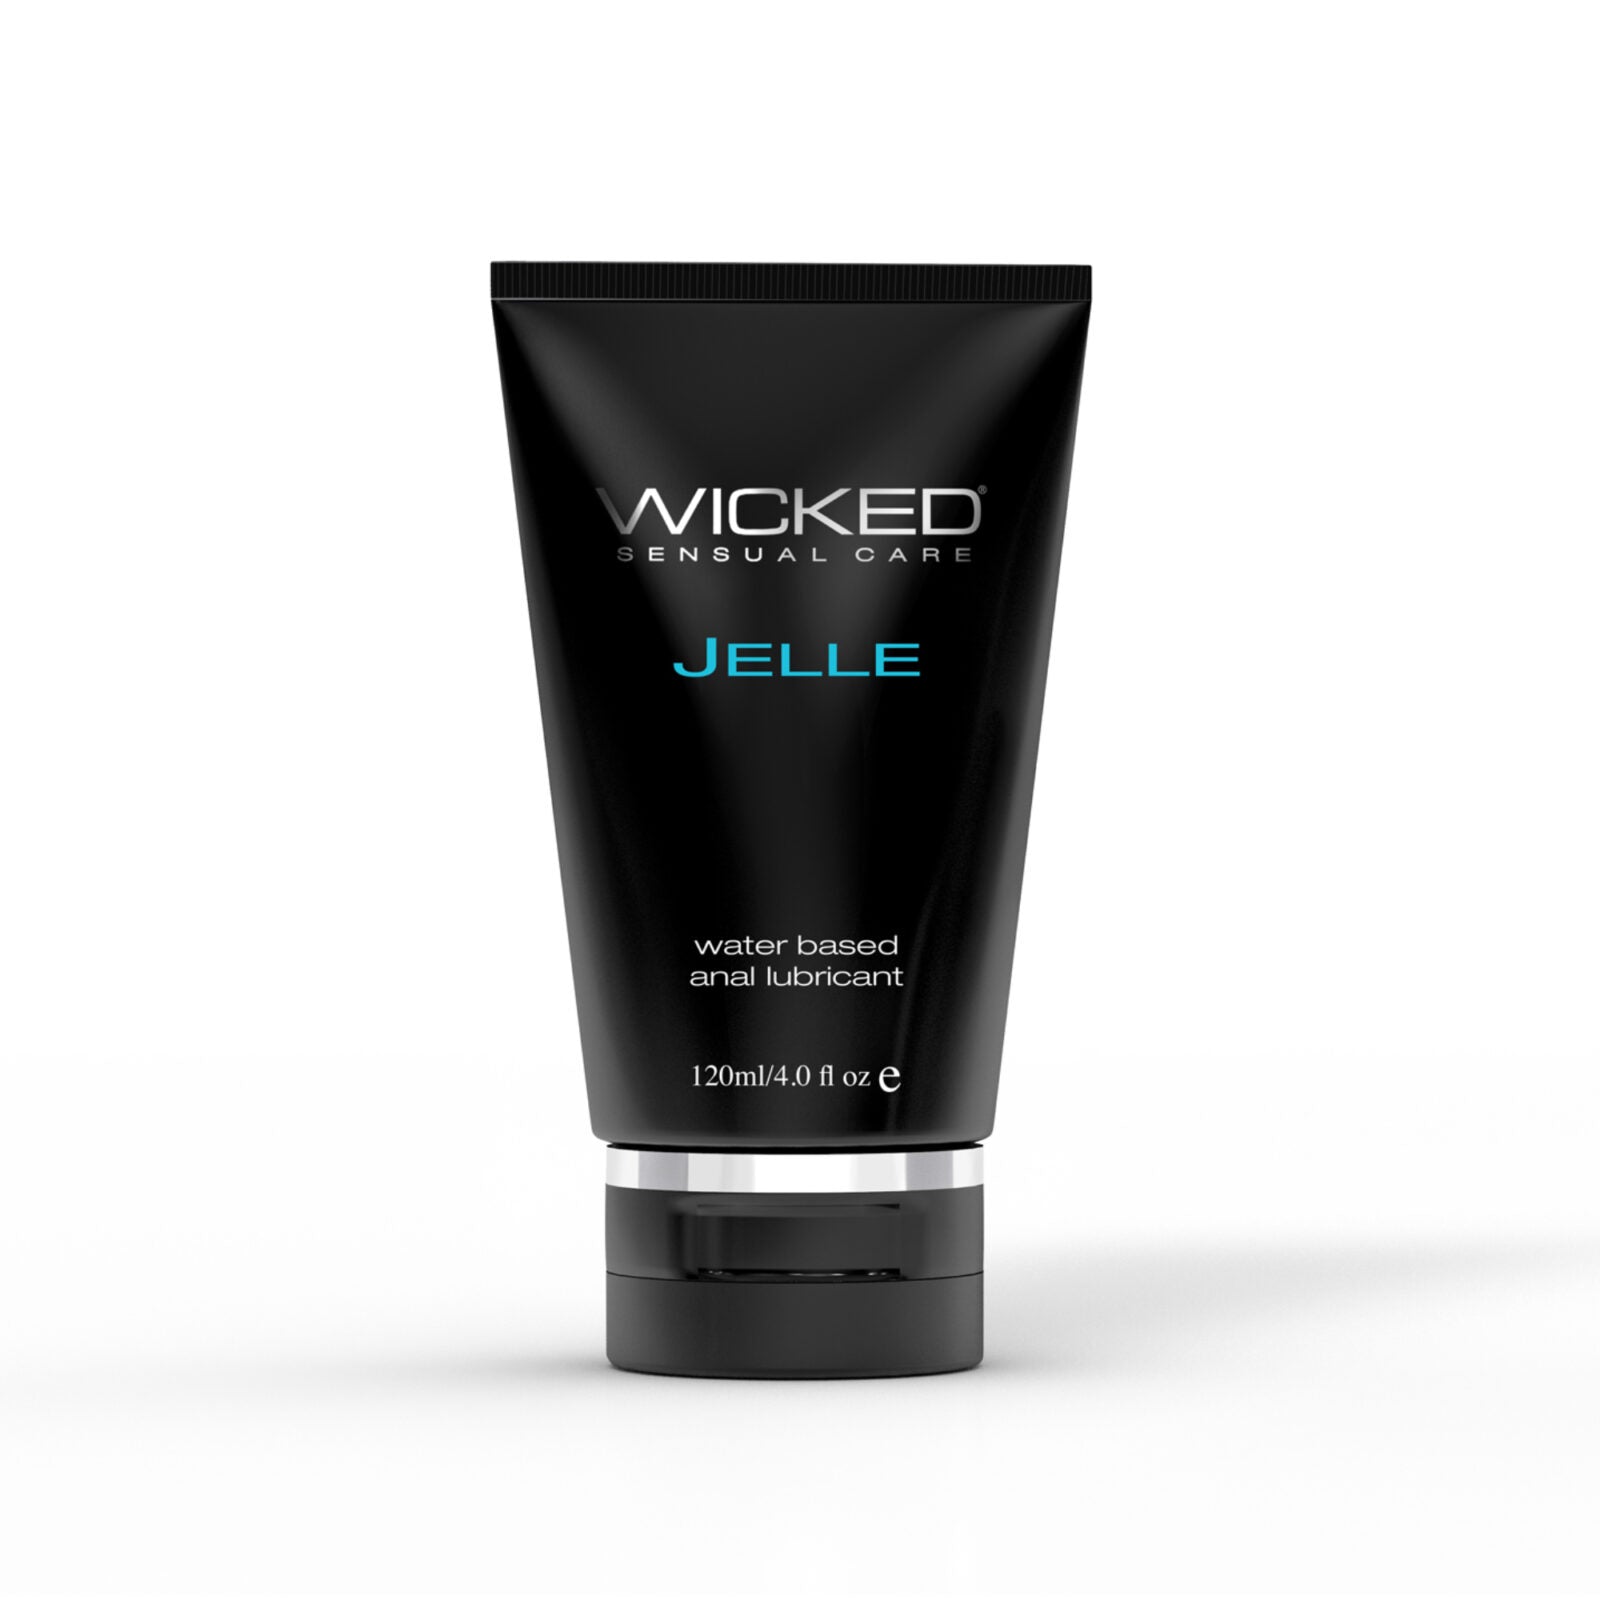 Wicked Jelle • Anal Water Lubricant